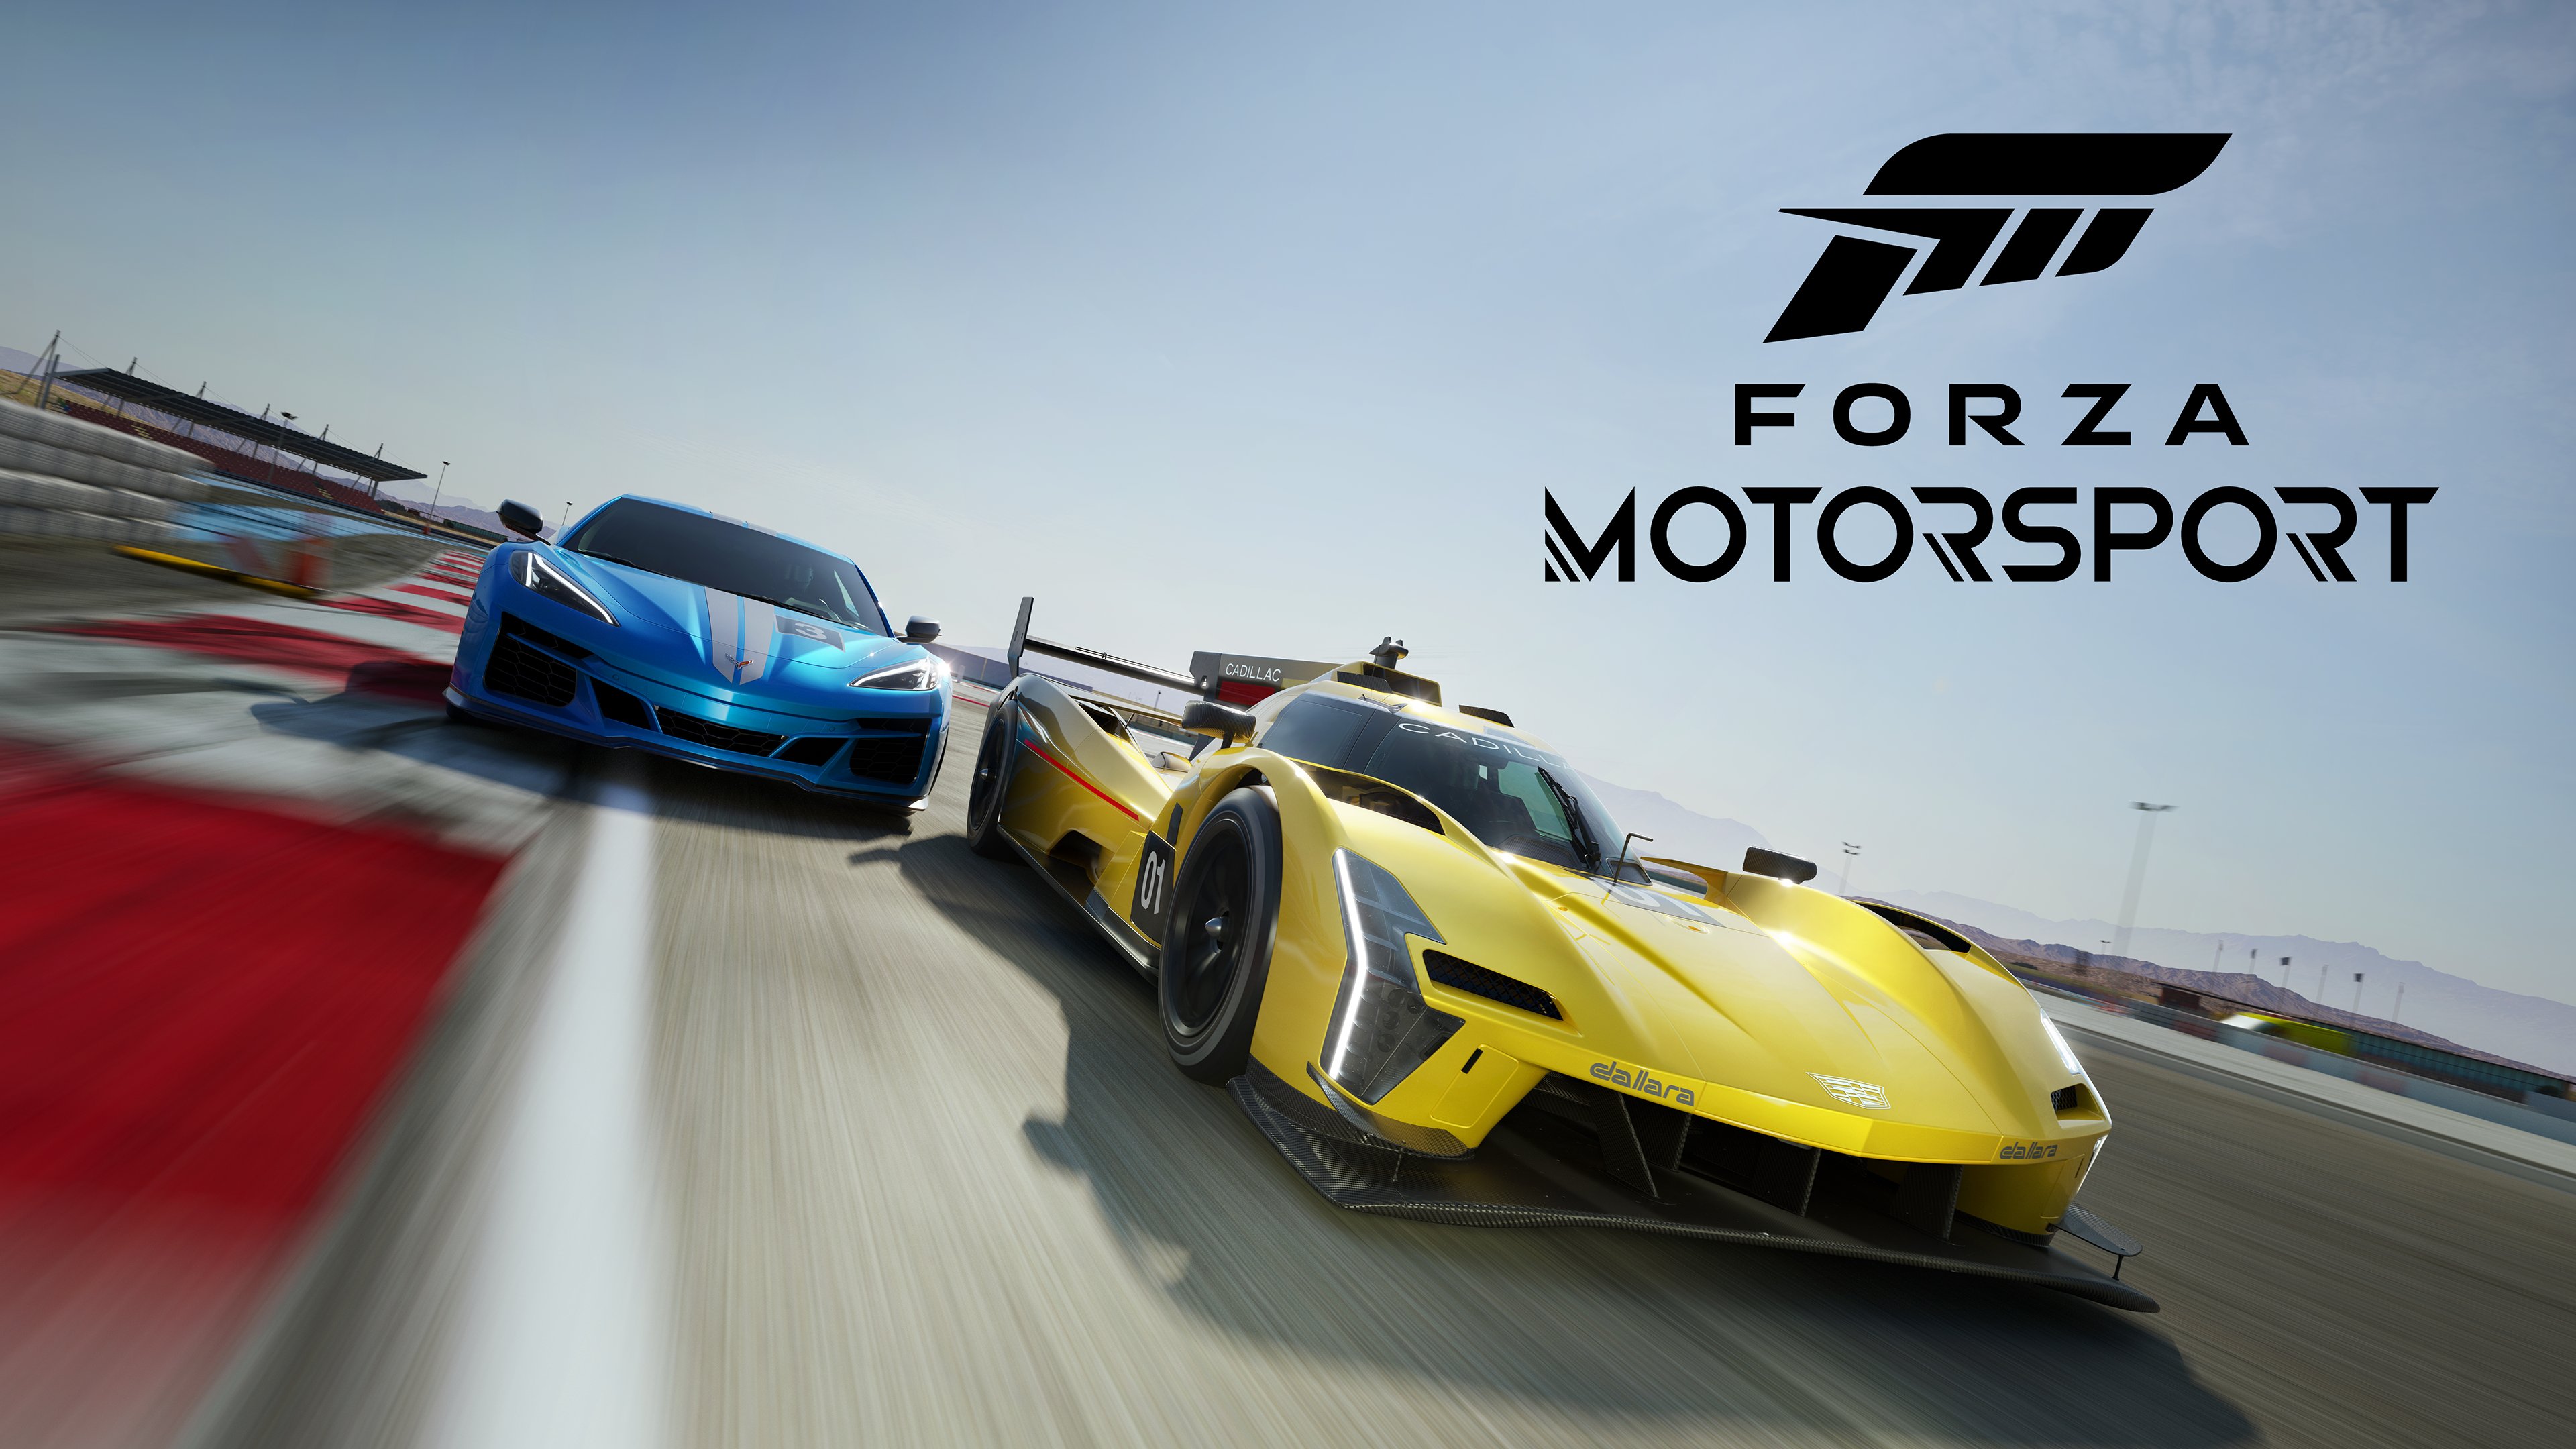 39 New Forza 6 Cars Confirmed - GameSpot